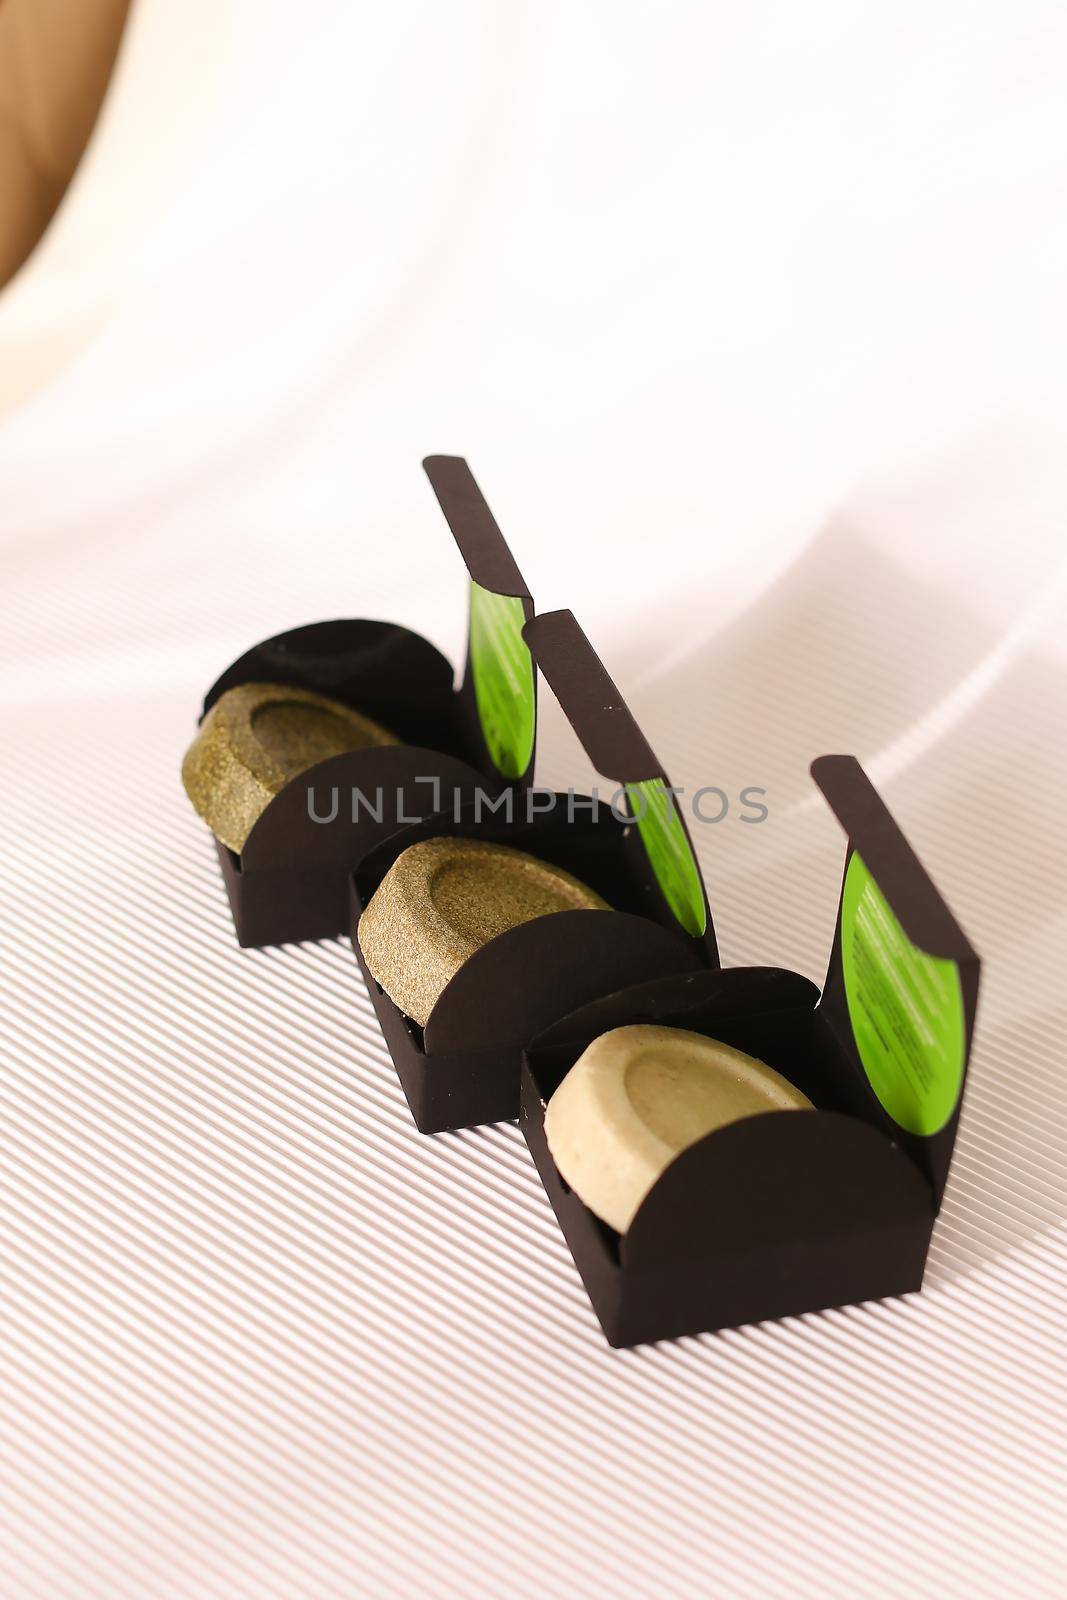 Three soap solid bars in black boxes on white background. Concept of organic cluelty free, kosher cosmetic online shop and pampering.